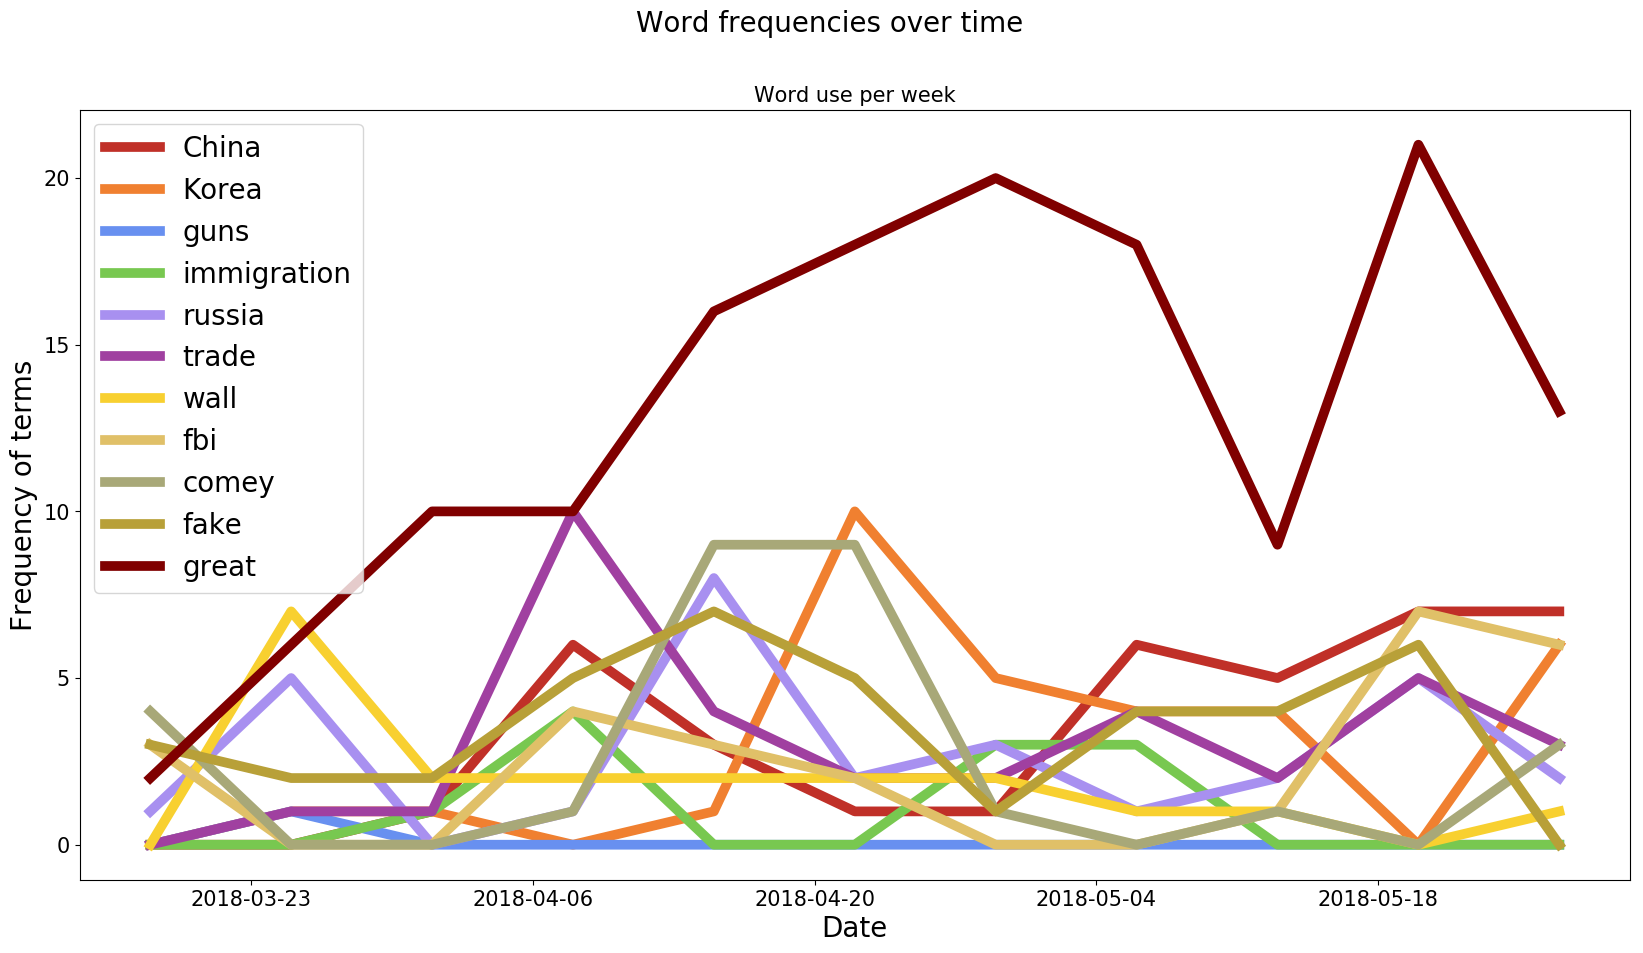 trumps word use over time